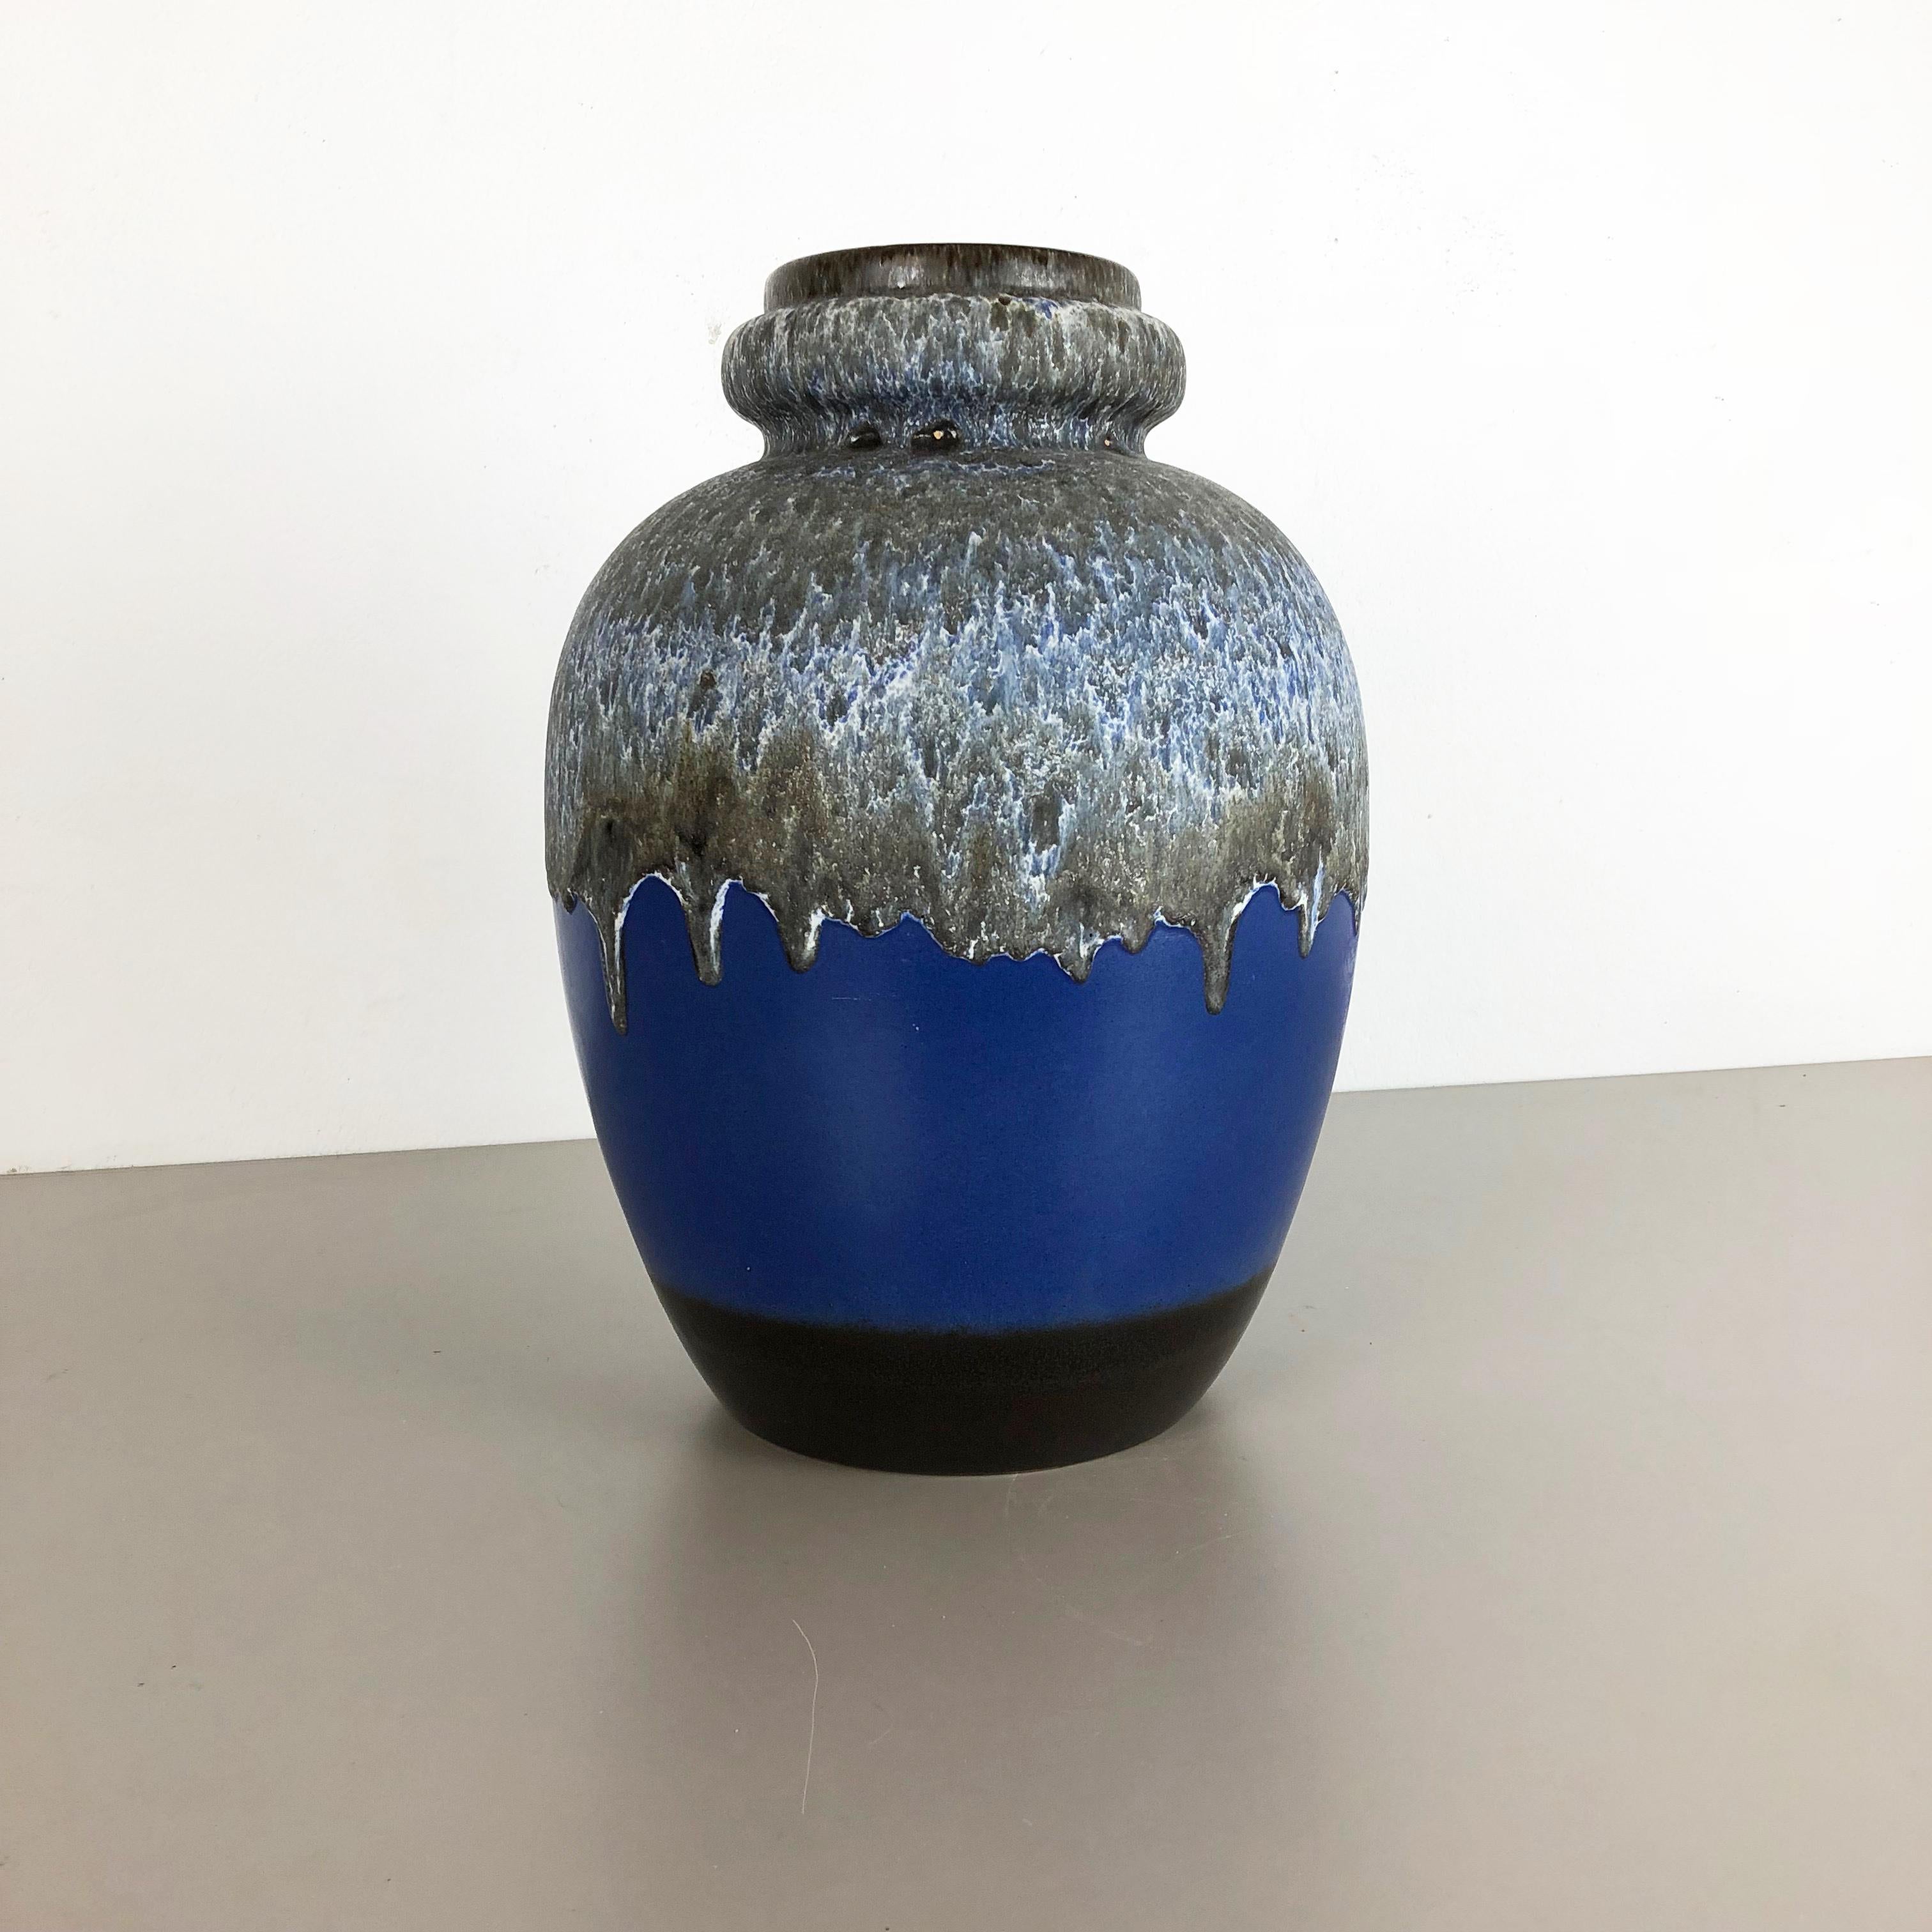 Article:

Fat lava art vase extra large version


Model: 286-42


Producer:

Scheurich, Germany



Decade:

1970s


Description:

This original vintage vase was produced in the 1970s in Germany. it is made of ceramic pottery in